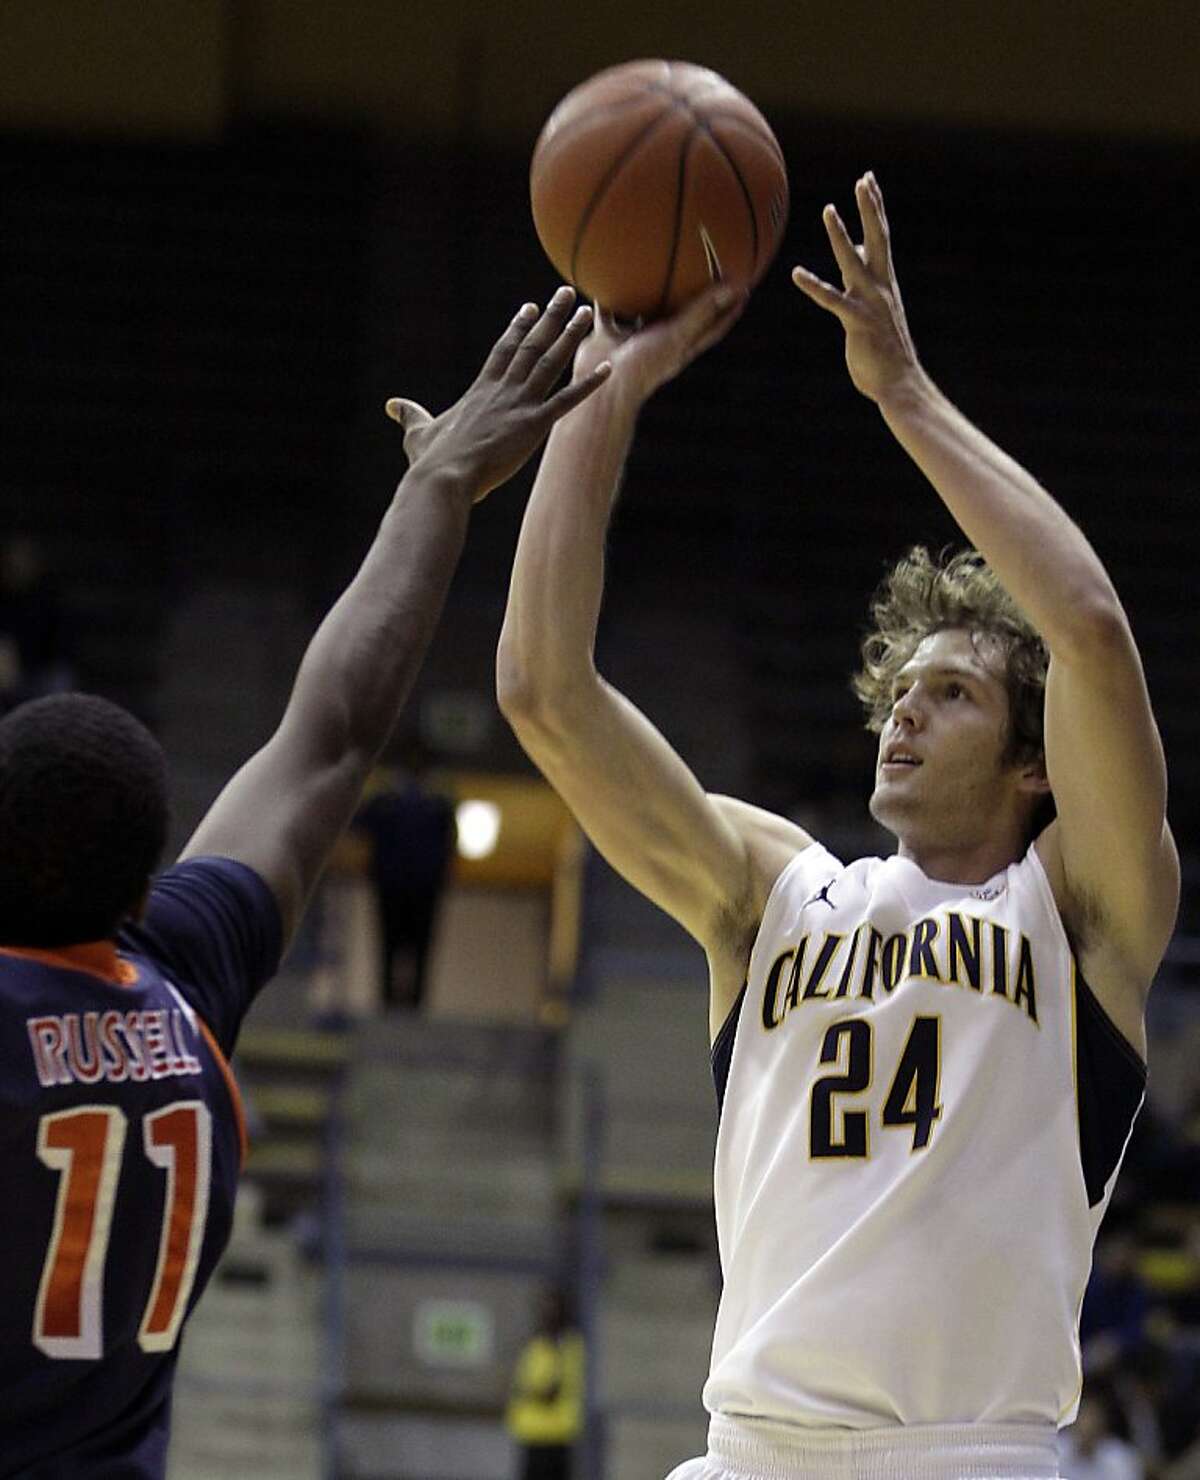 California's Ricky Kreklow shoots over Pepperdine's Atif Russell during the second half of an NCAA college basketball game Tuesday, Nov. 13, 2012, in Berkeley, Calif. (AP Photo/Ben Margot)